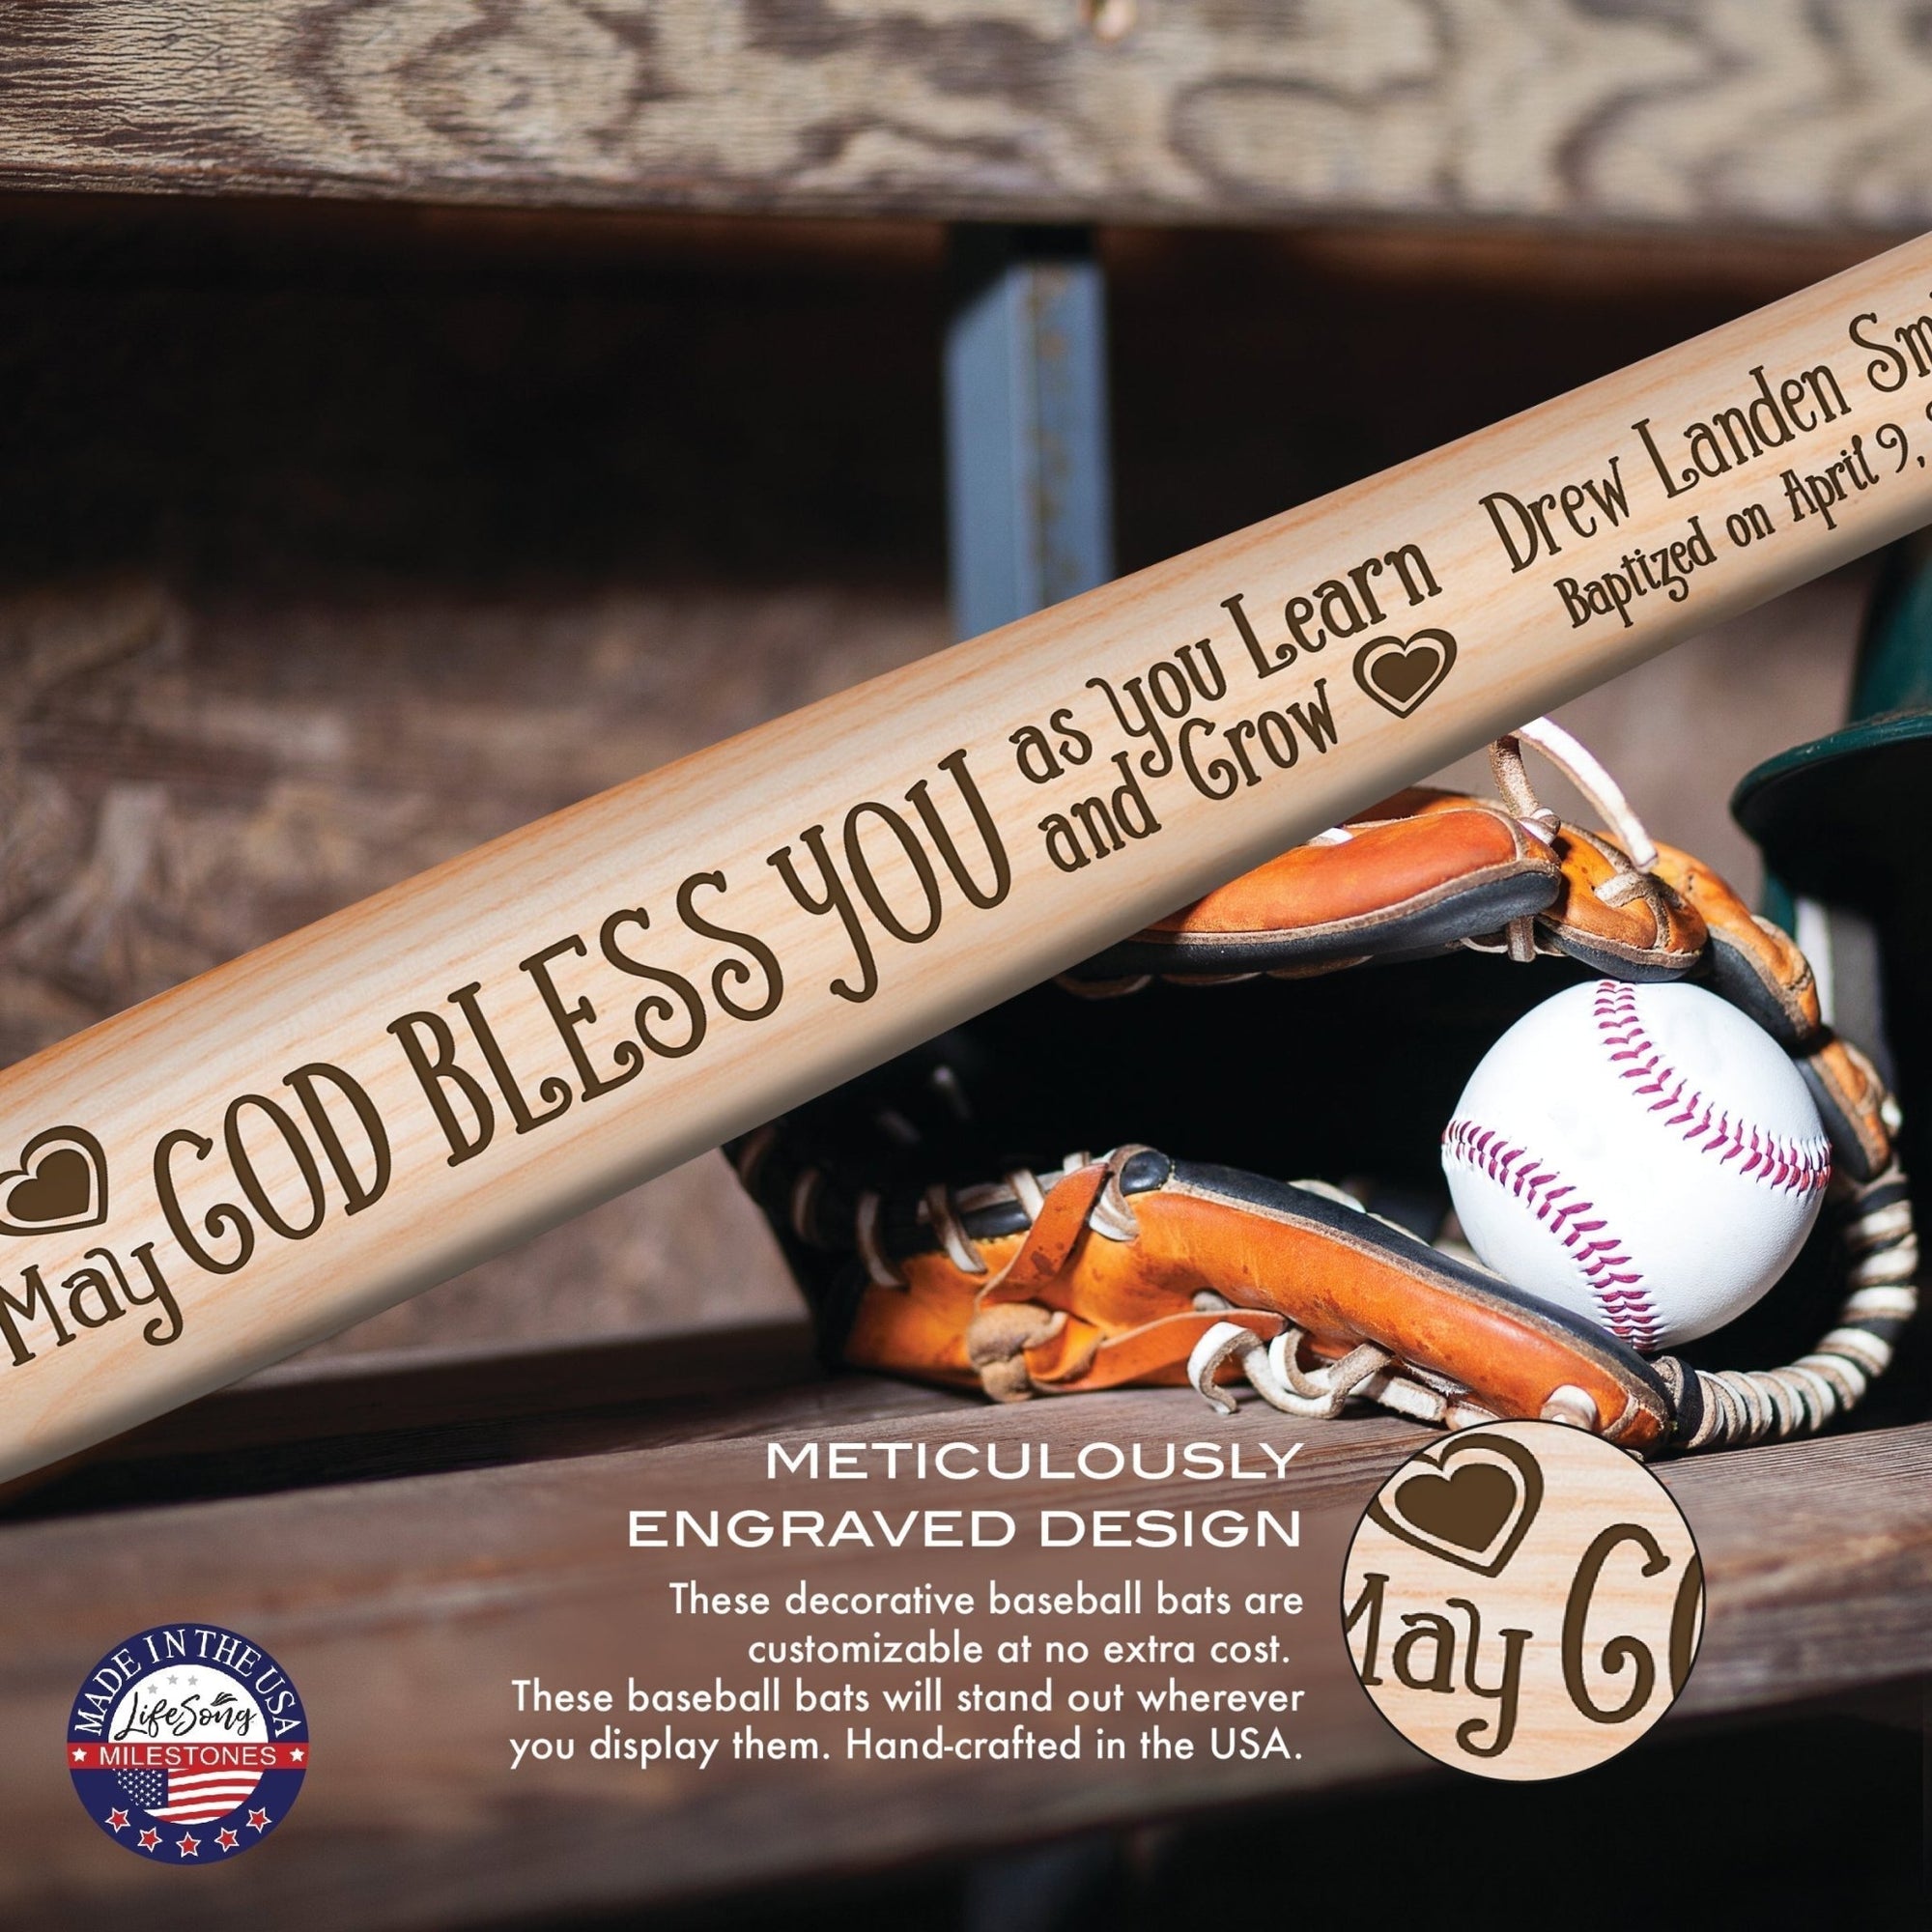 Personalized Baseball Bat Baptism Gifts For Boys - May God Bless You - LifeSong Milestones